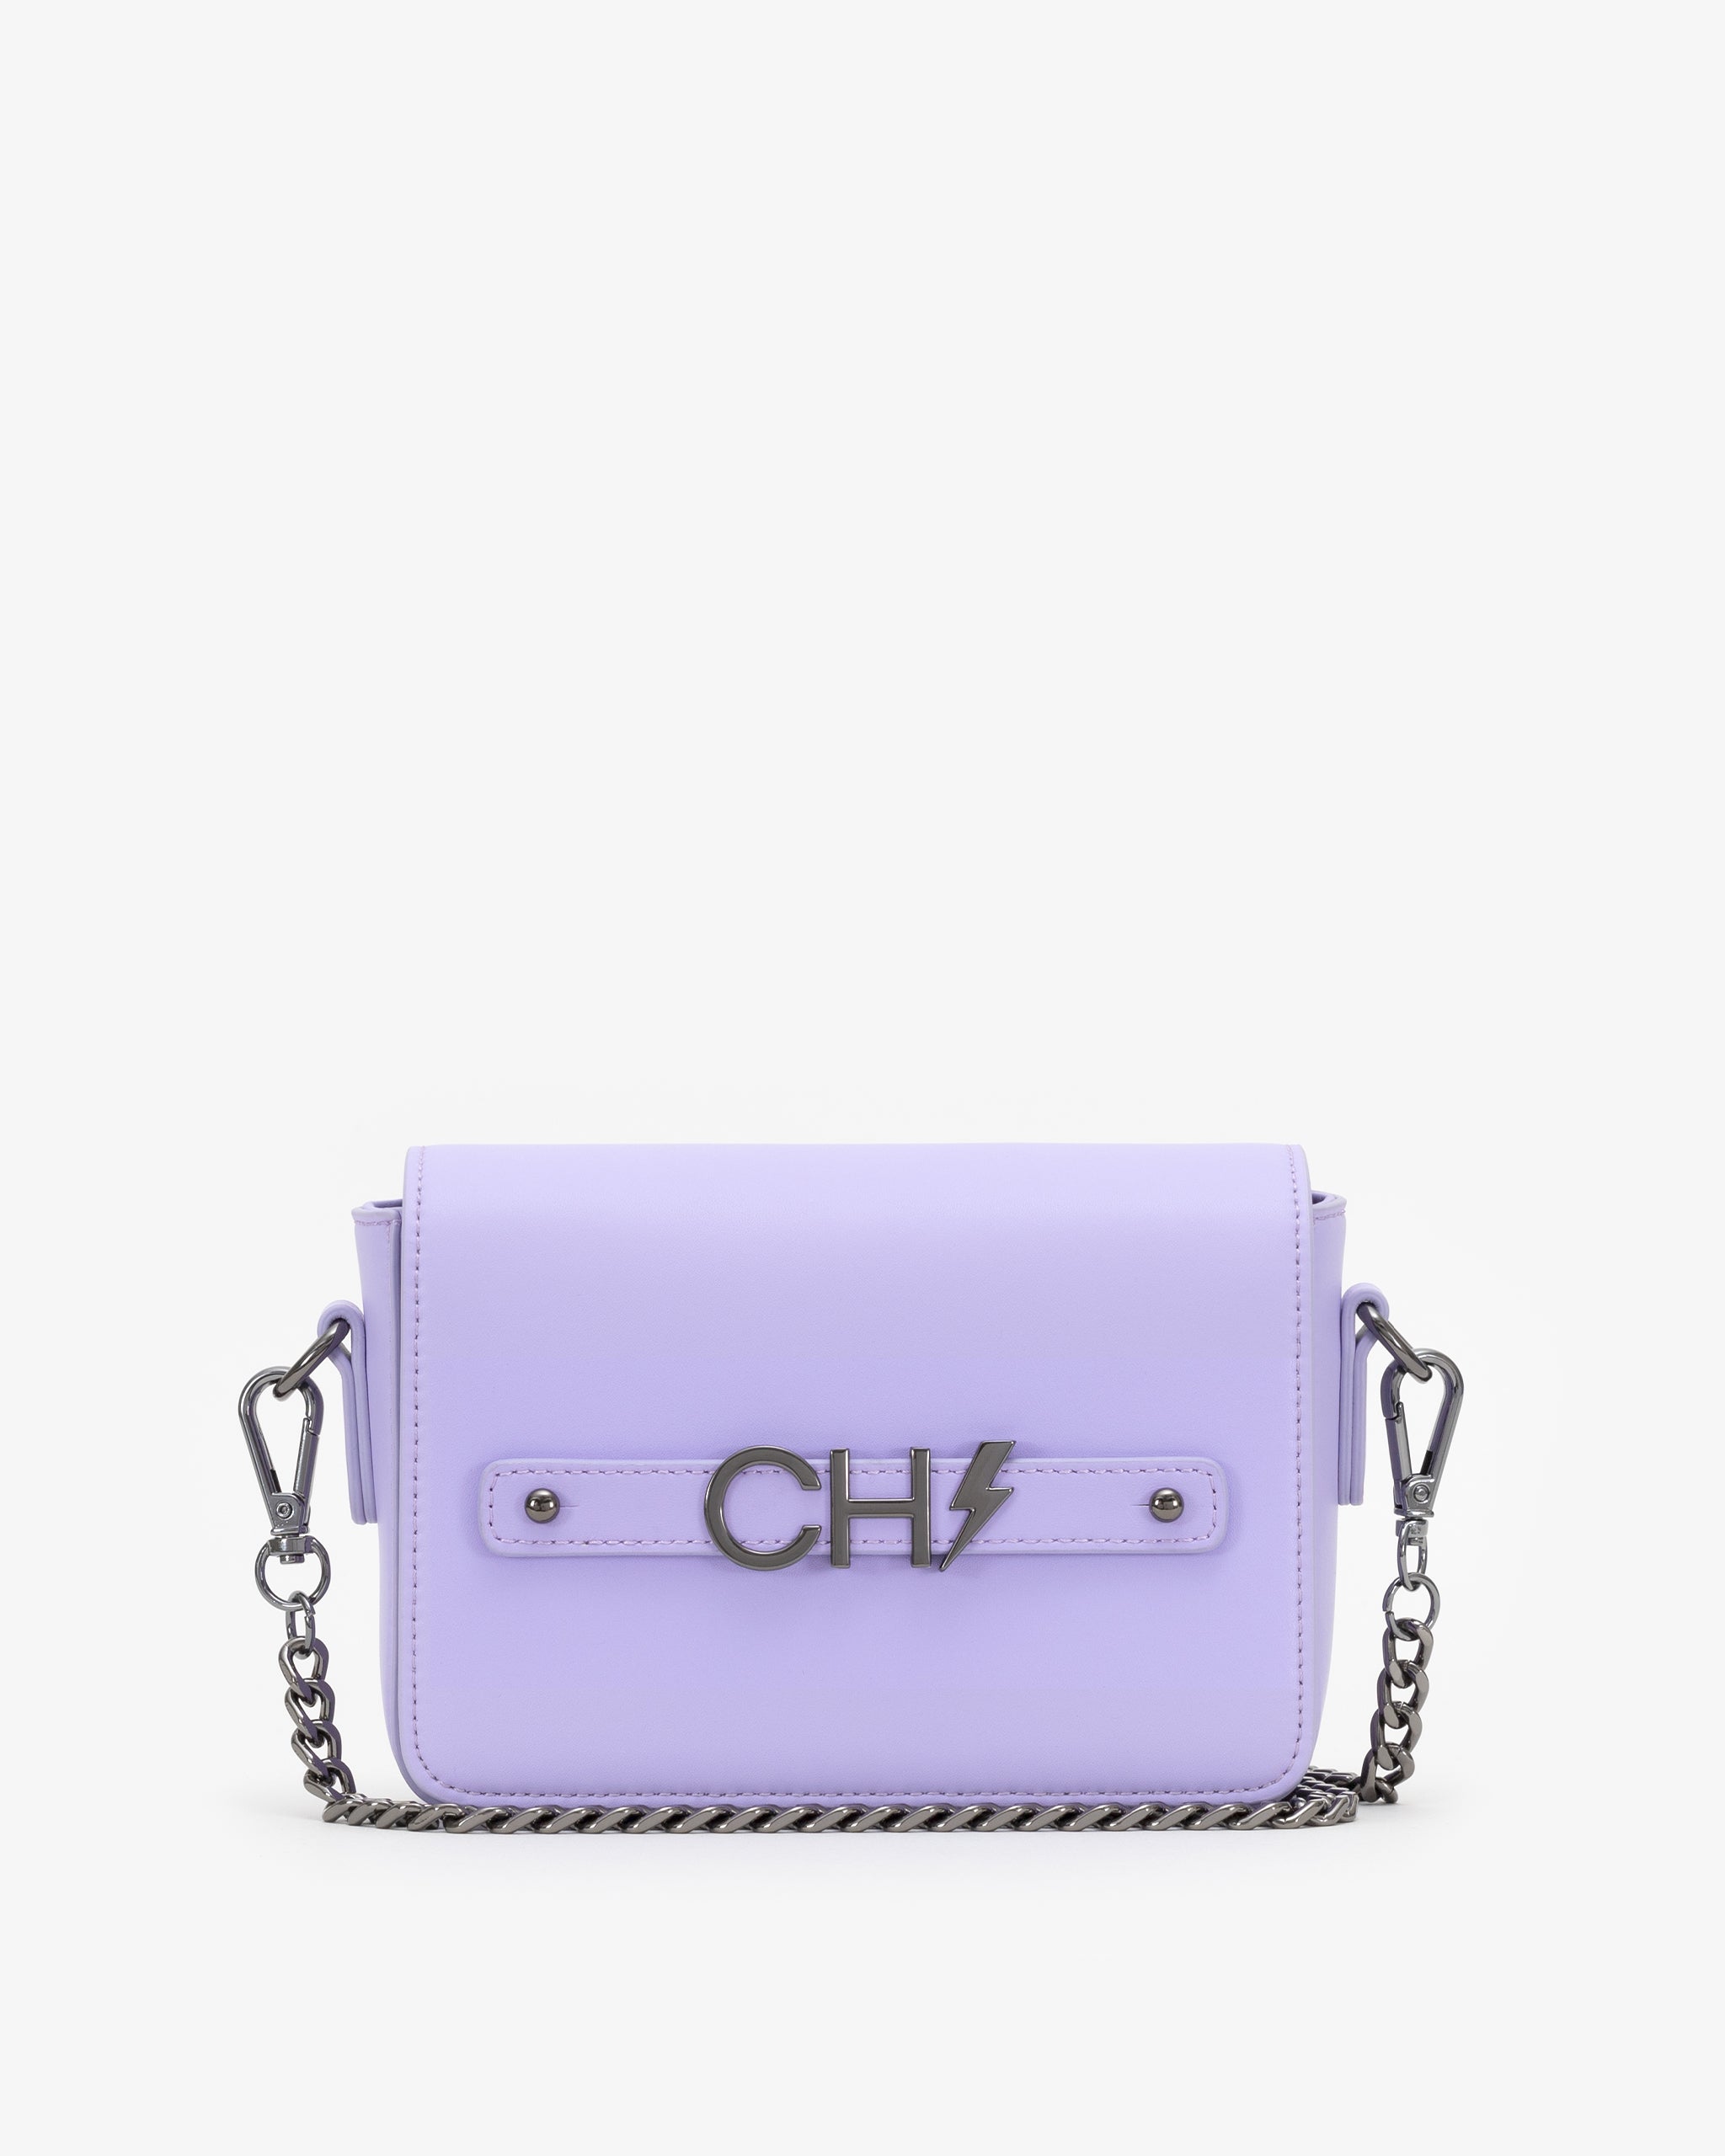 Crossbody Bag in Lavender with Personalised Hardware